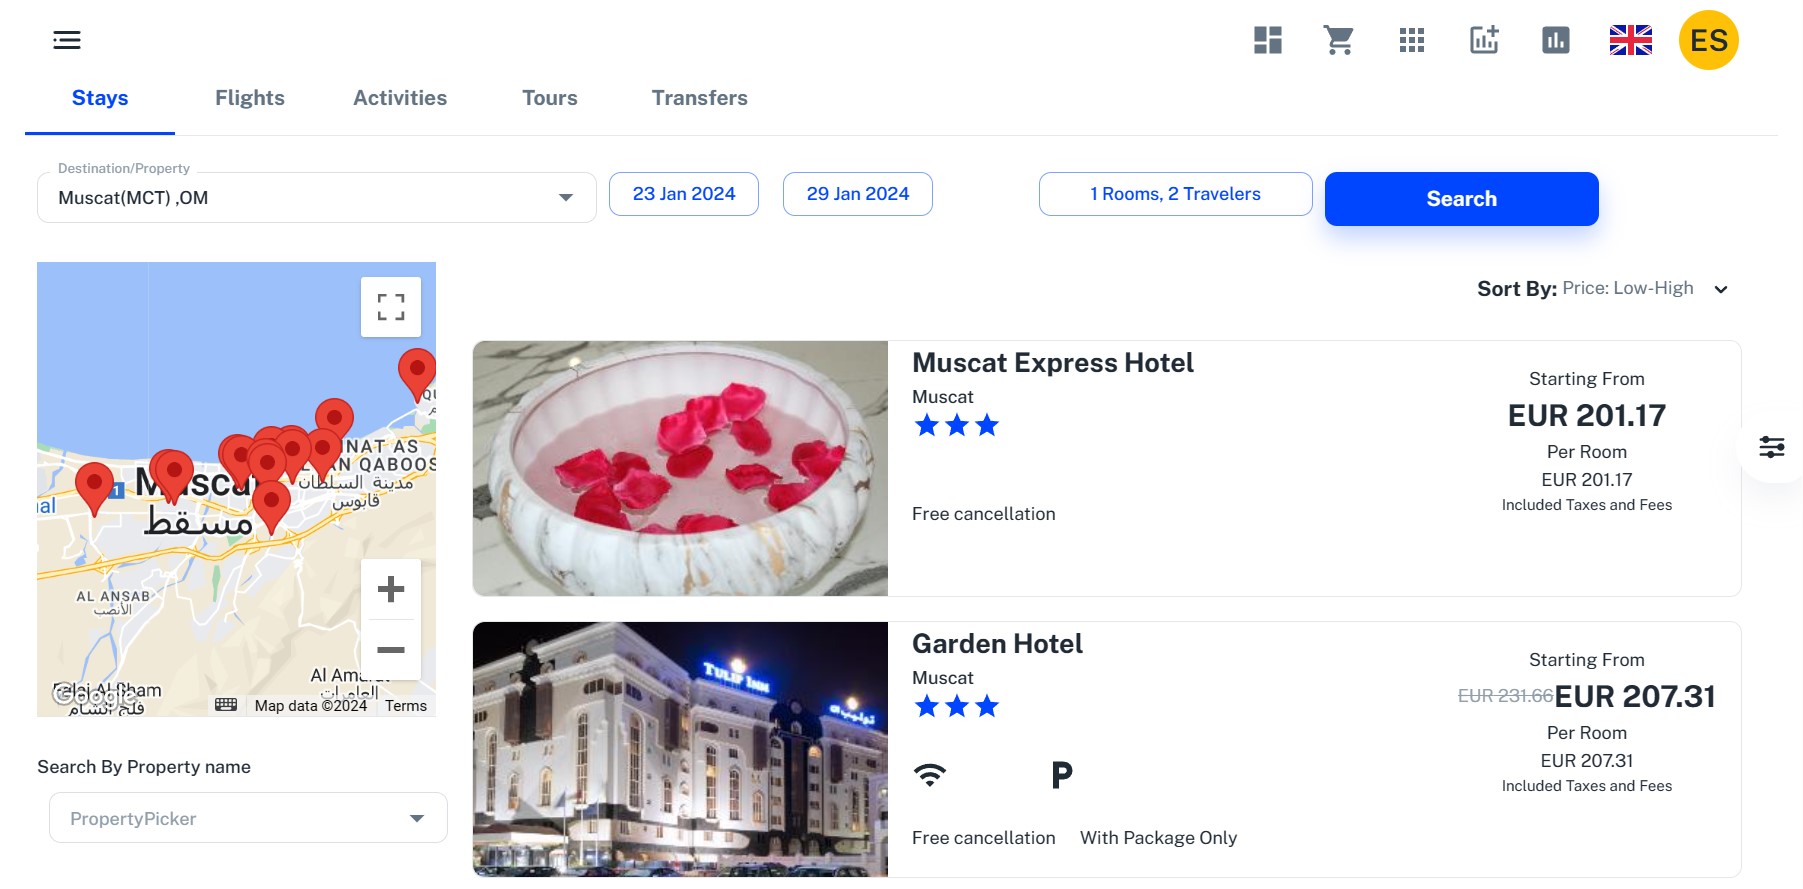 Hotel Search Results